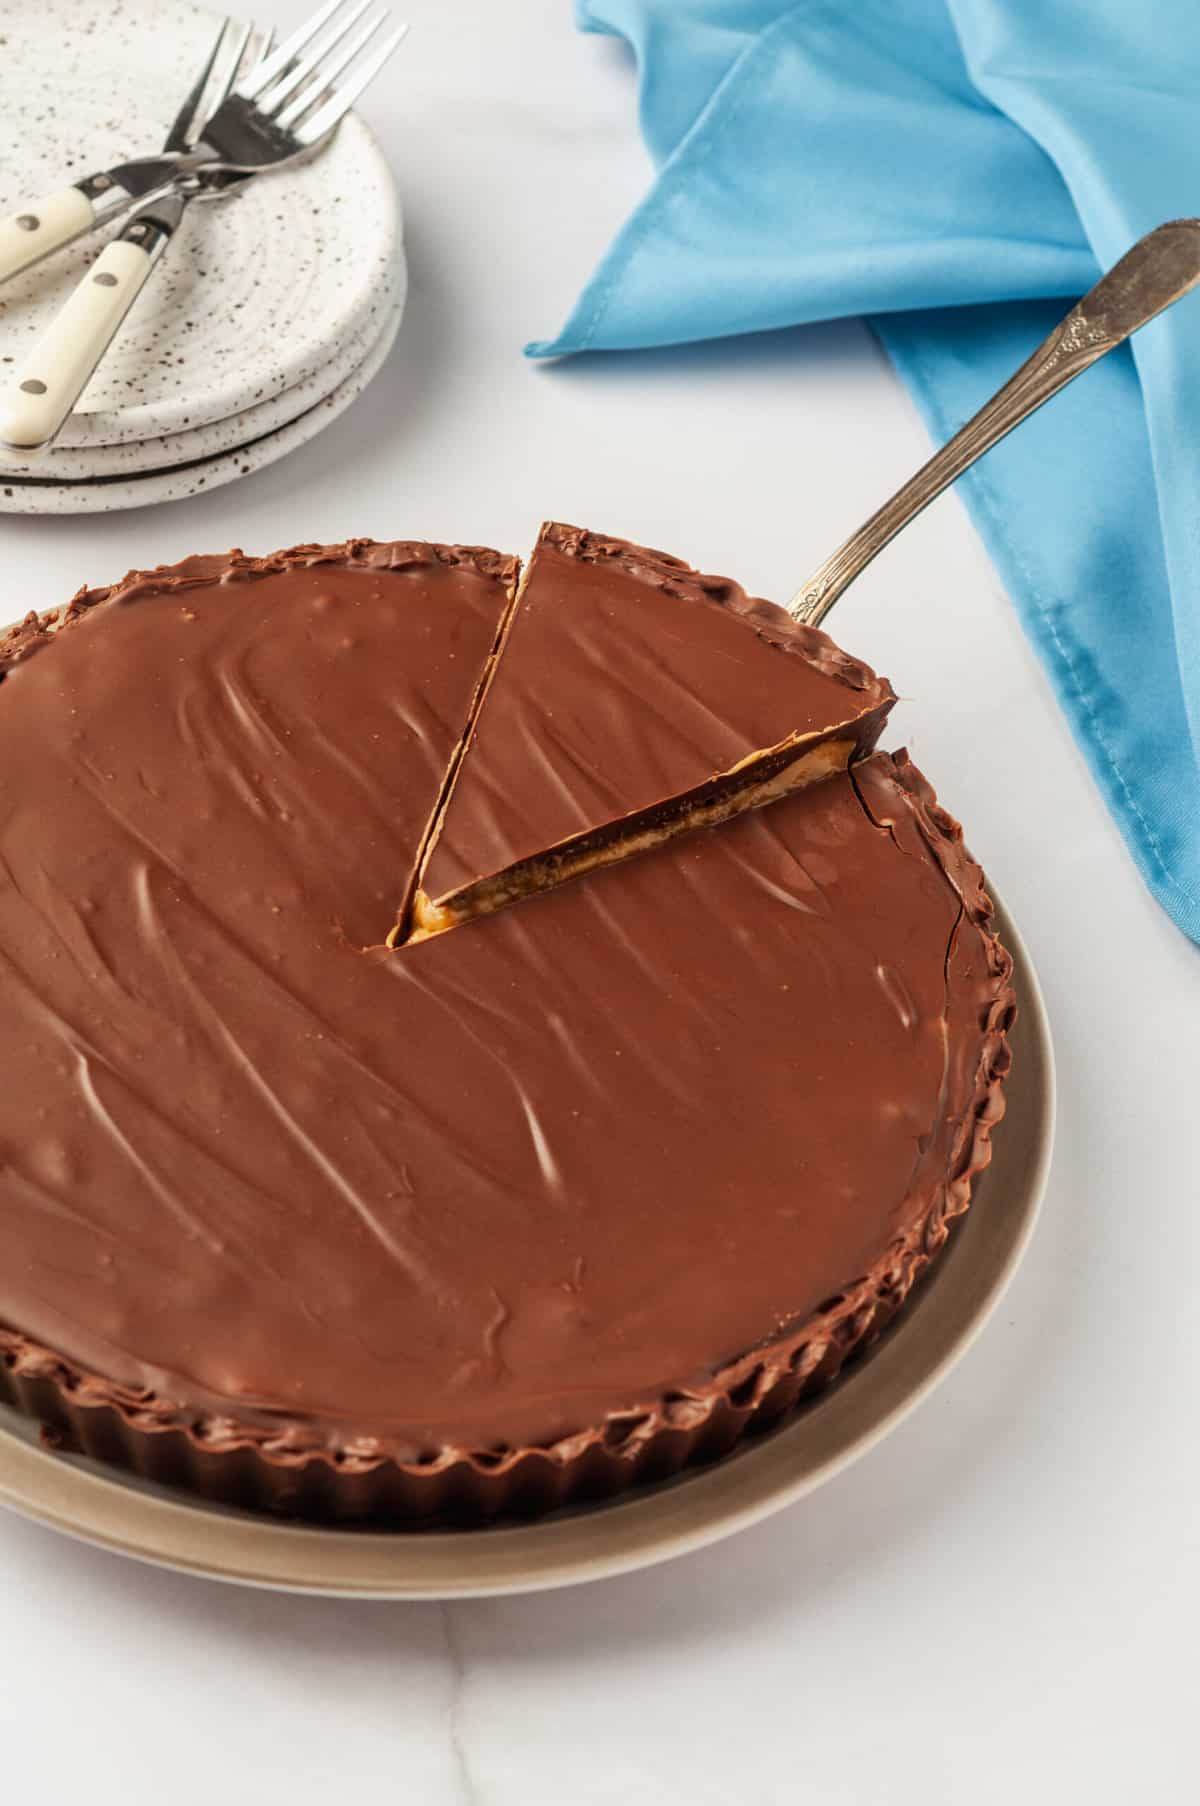 Reese's peanut butter cup pie with a slice getting taken out by a gold cake spatula.